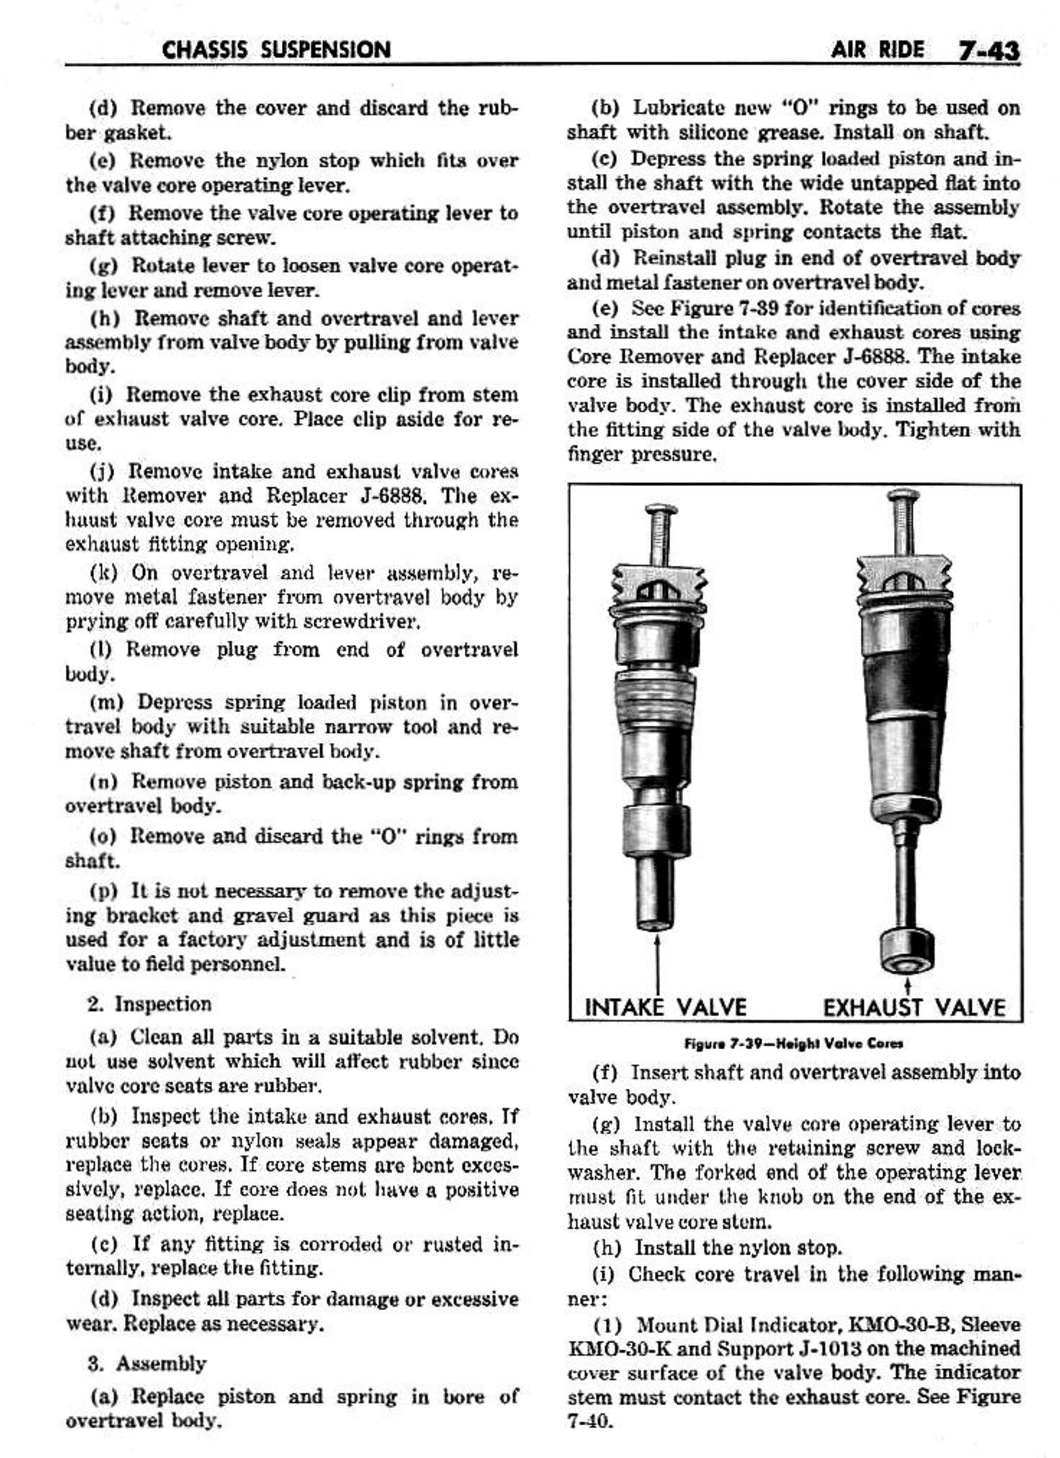 n_08 1959 Buick Shop Manual - Chassis Suspension-043-043.jpg